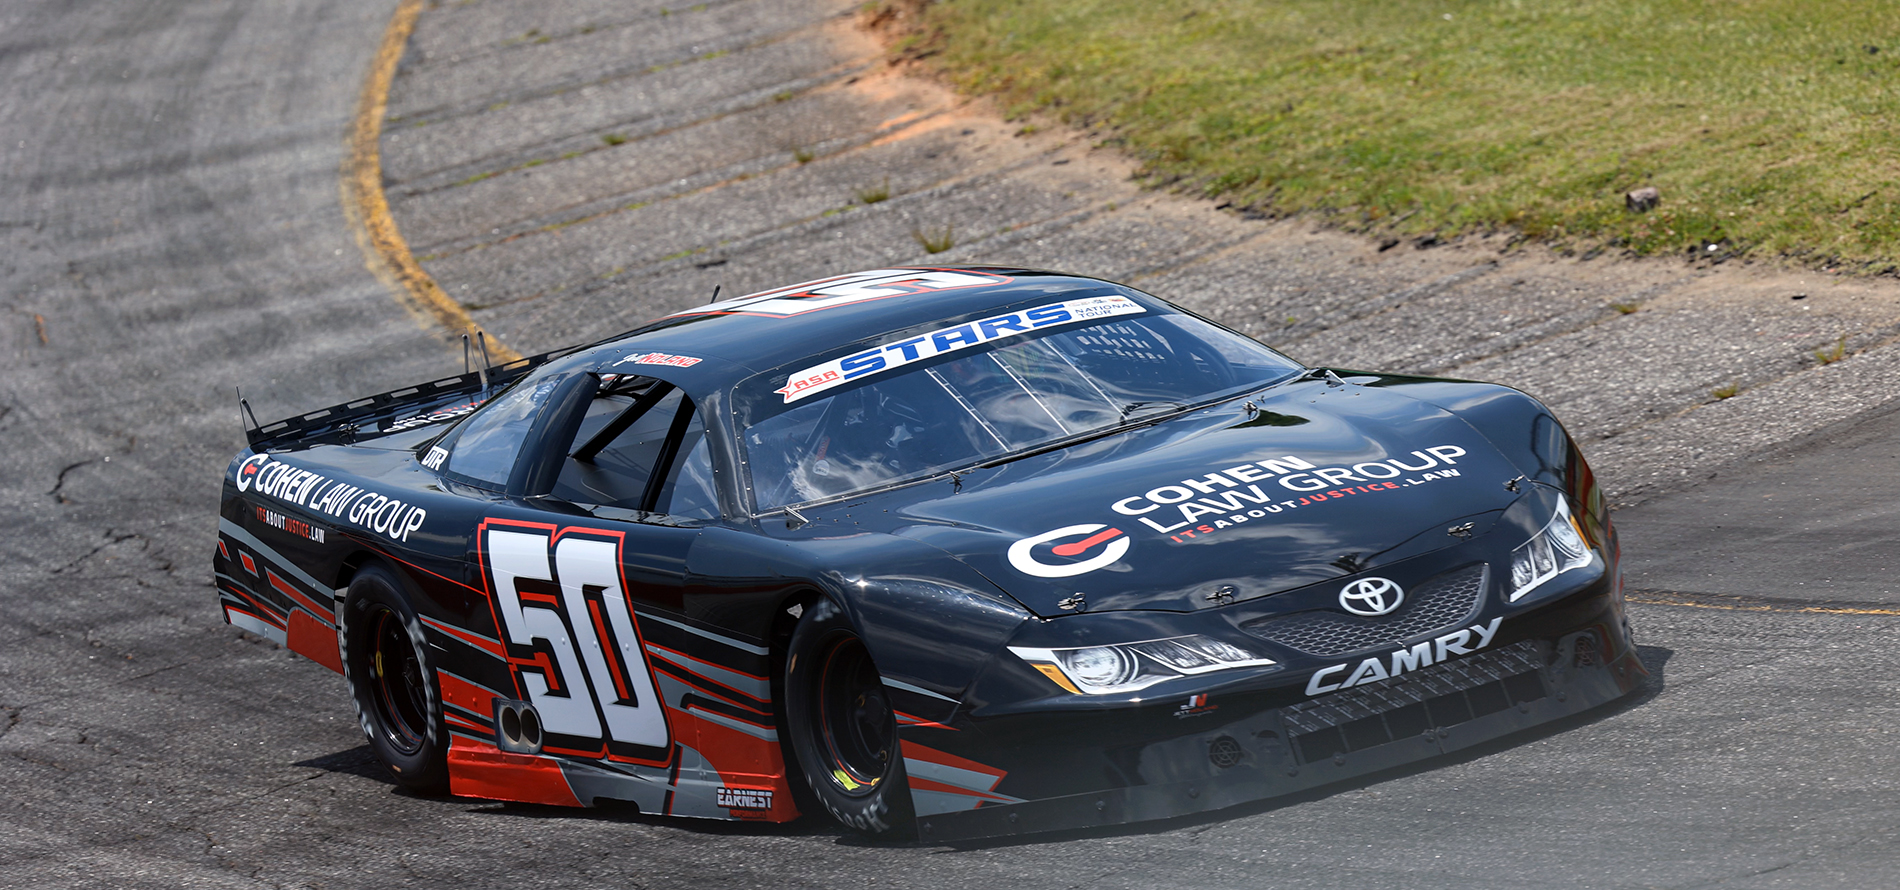 A black stock car, Jett Noland's number 50 and 'Cohen Law Group' sponsorship, branded as a Toyota Camry, races around a curved section of the track. The car displays a 'ASA STARS' decal on the windshield and navigates close to the grassy infield.